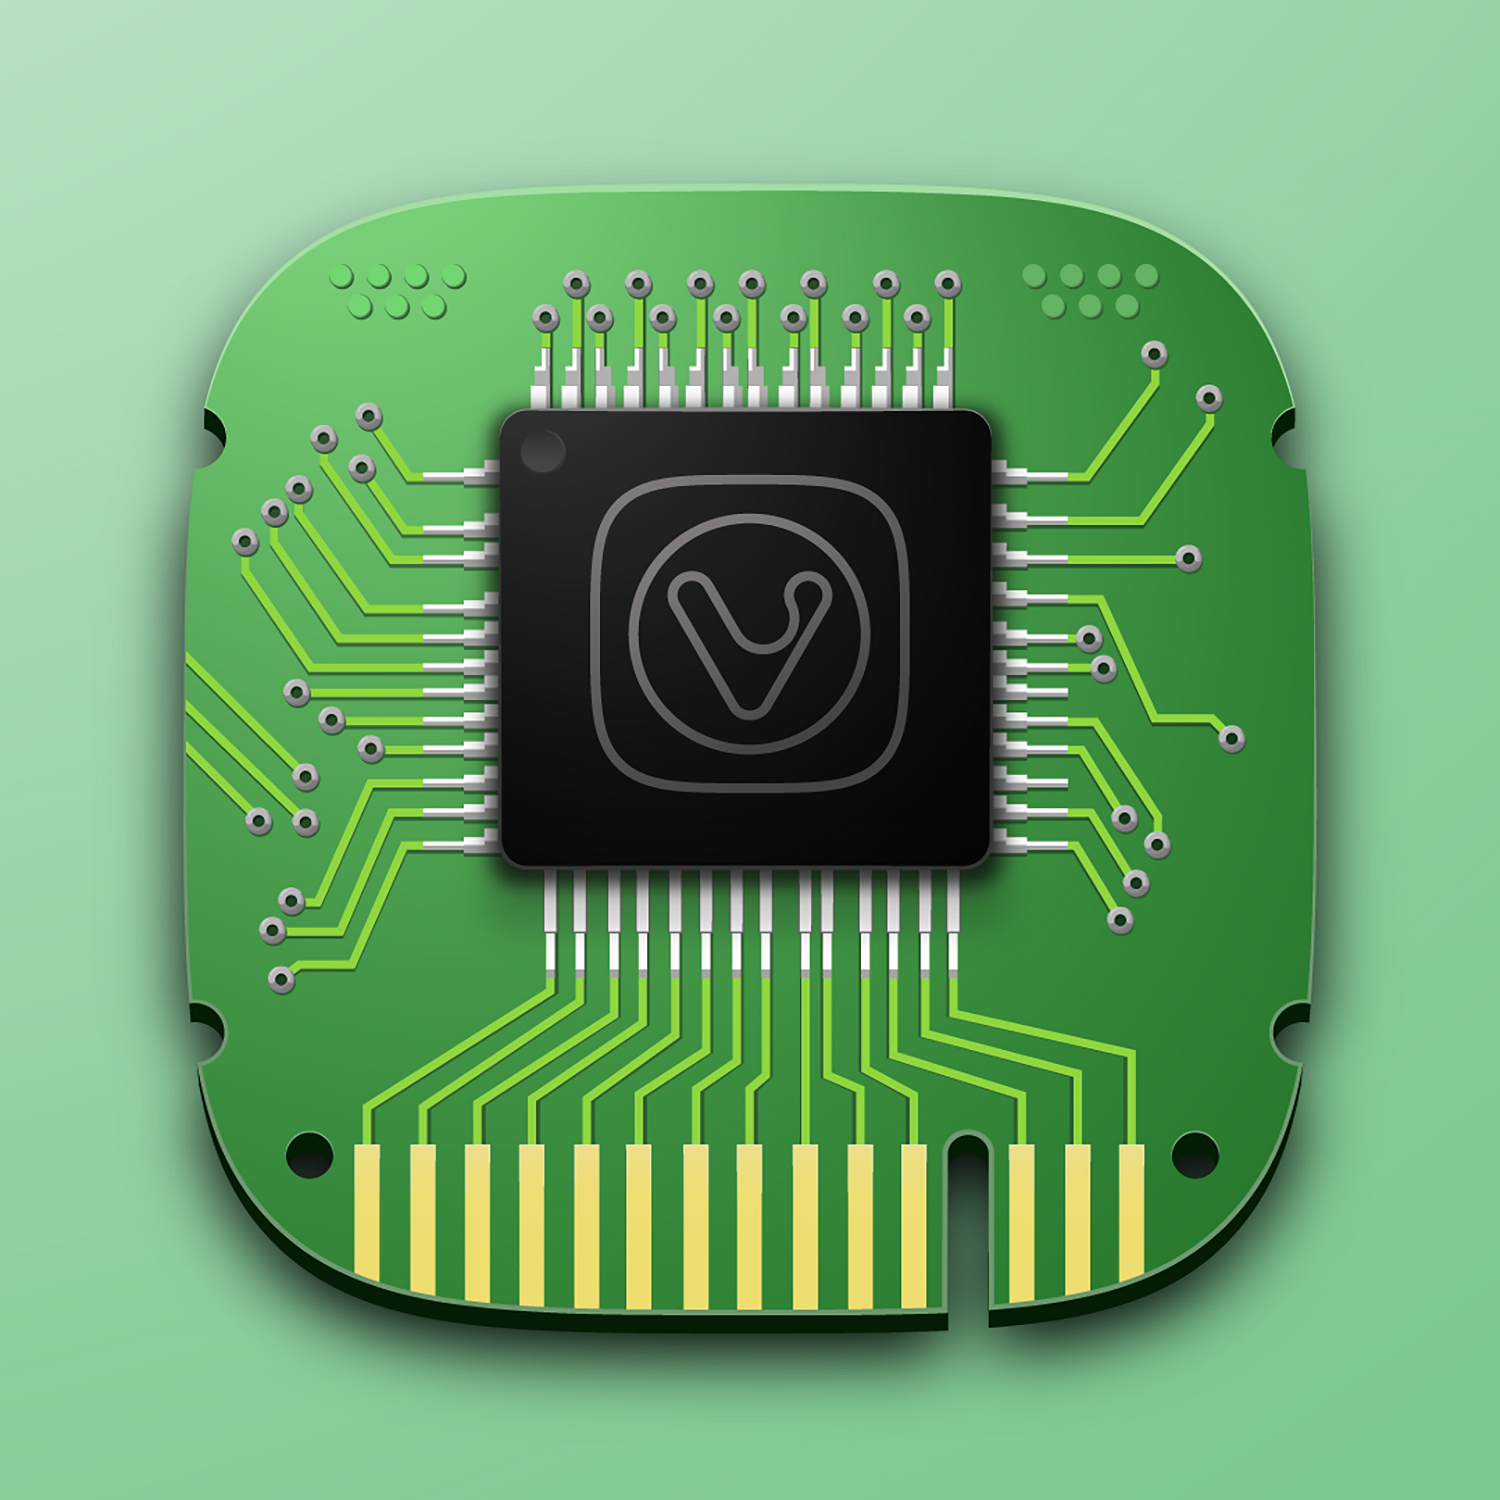 Image of Vivaldi browser logo on a chip. The image has different shades of green, a shade of yellow, and the logo in the centre against a black background